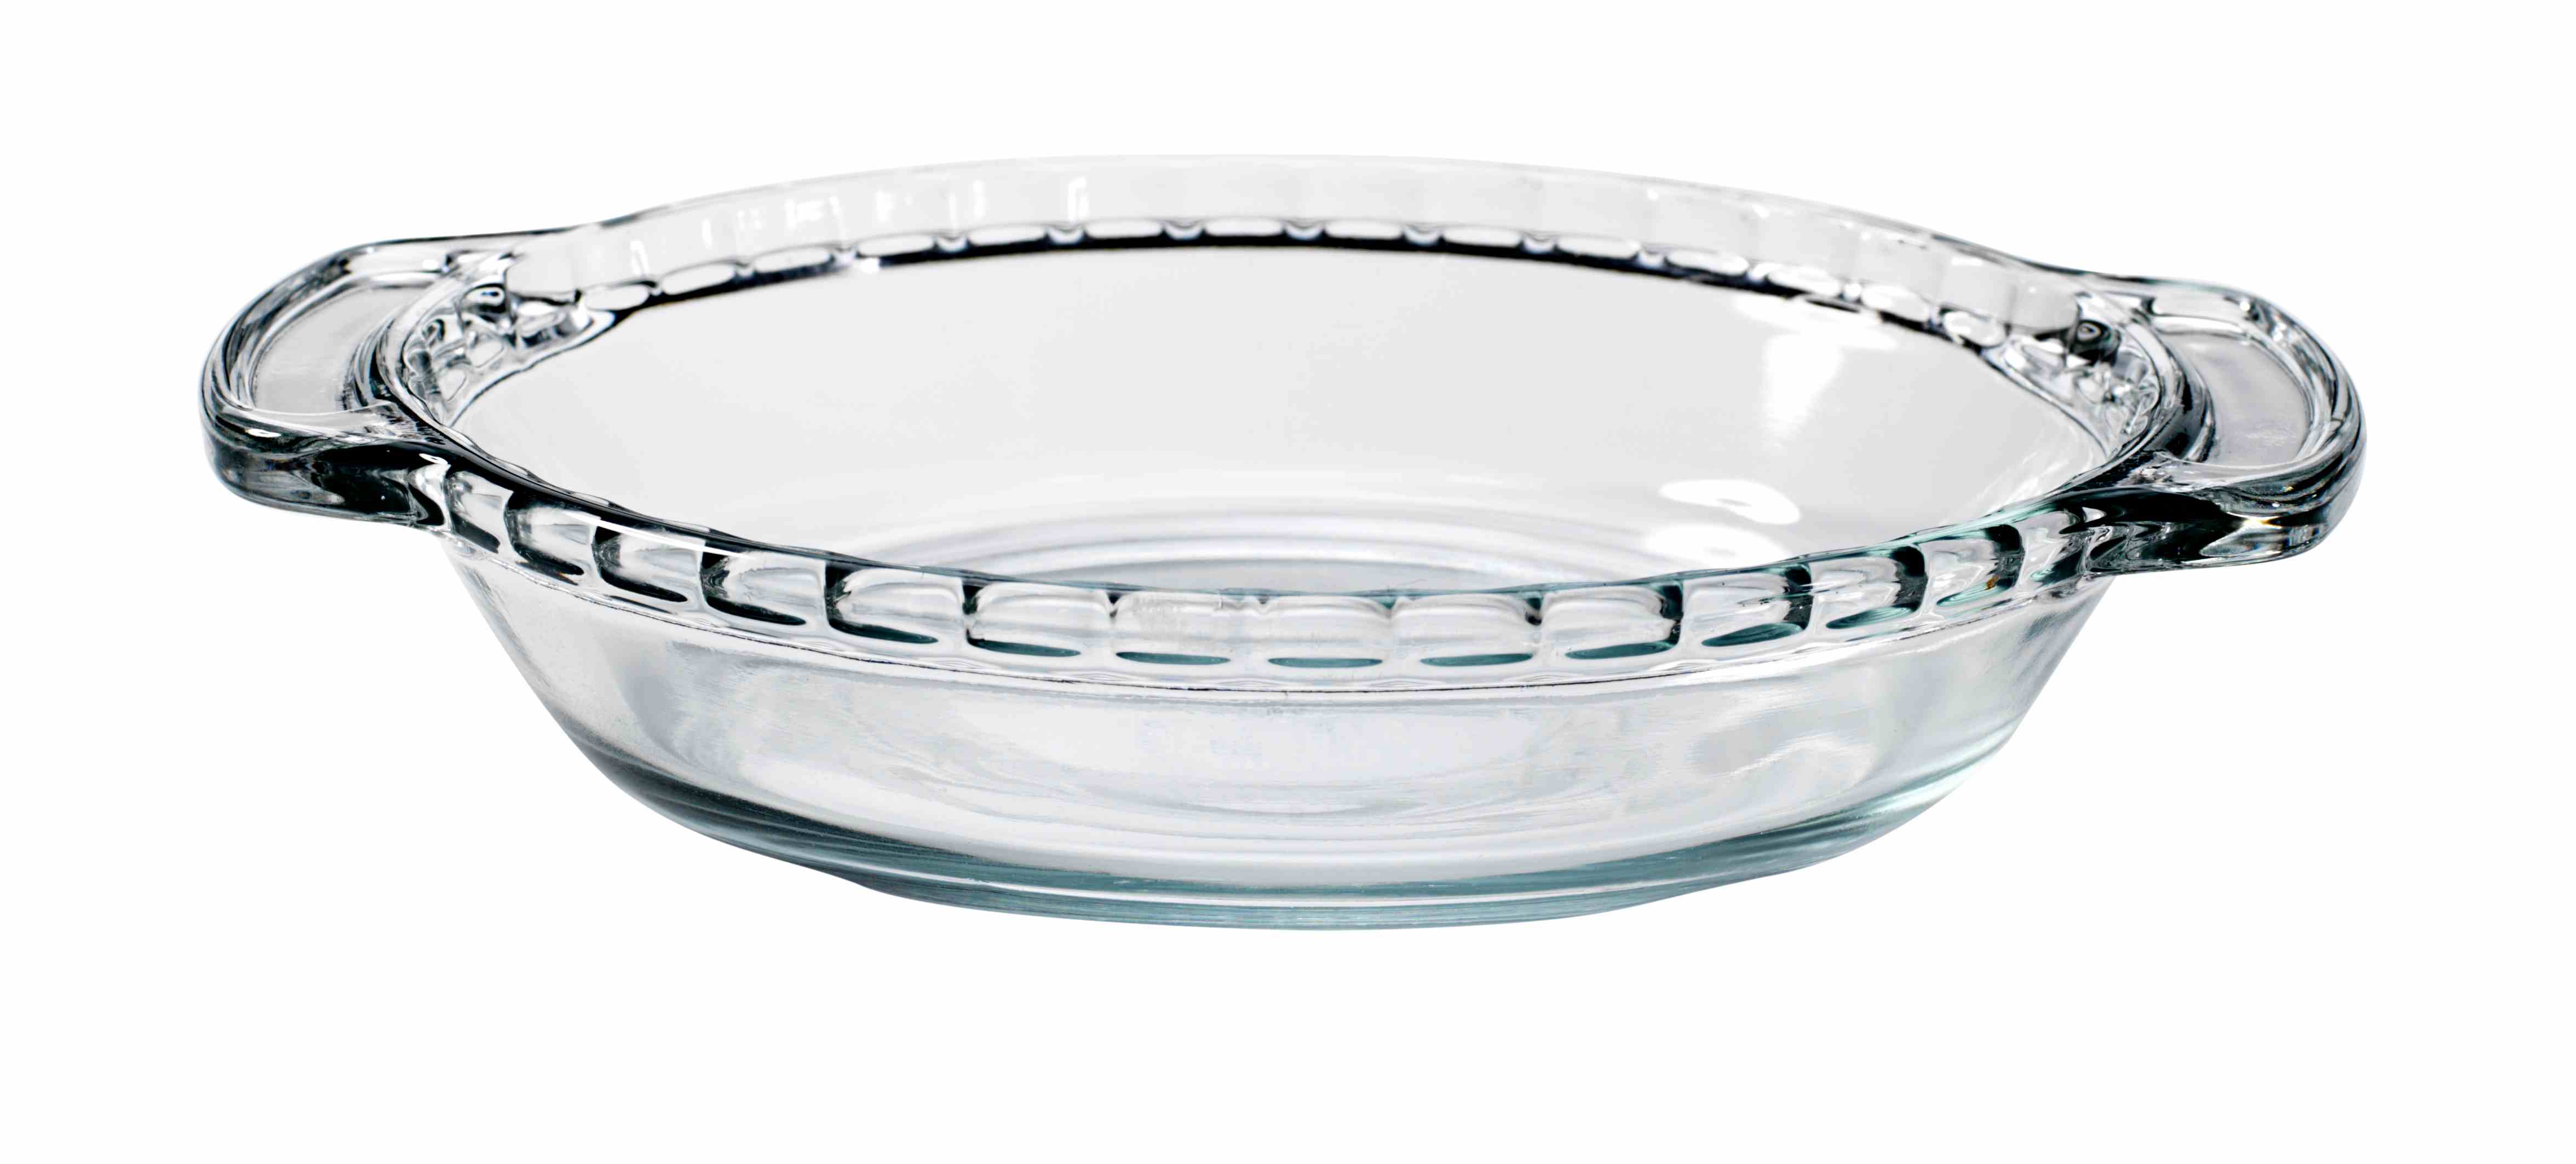 6-inch glass pet bowl for cats or small dogs